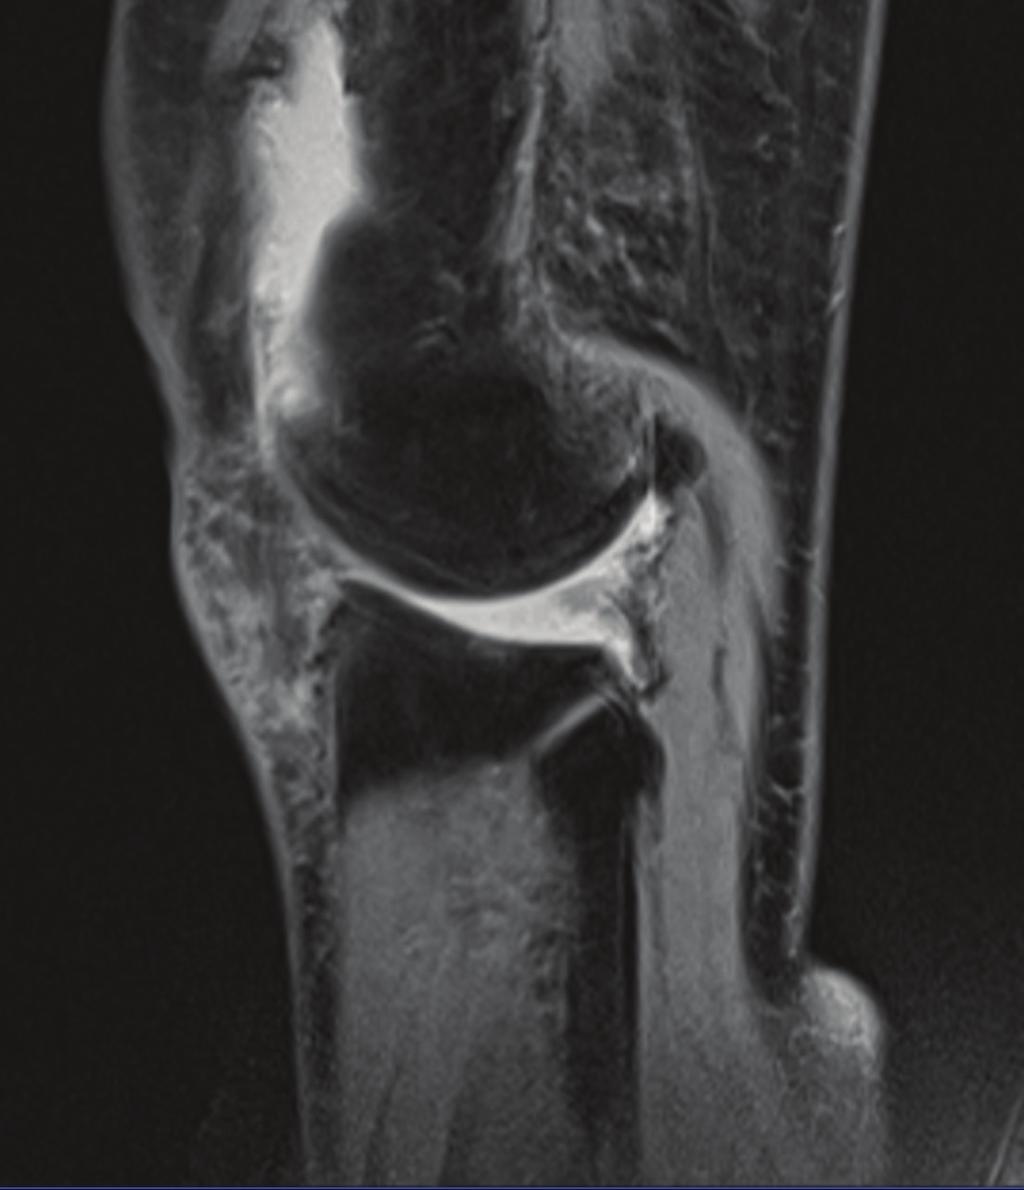 We reported two cases of the spontaneous recurrent hemarthrosis of the knee, in which a pulsating soft tissue with a tubular structure was identified on the exposed synovium in the posterolateral